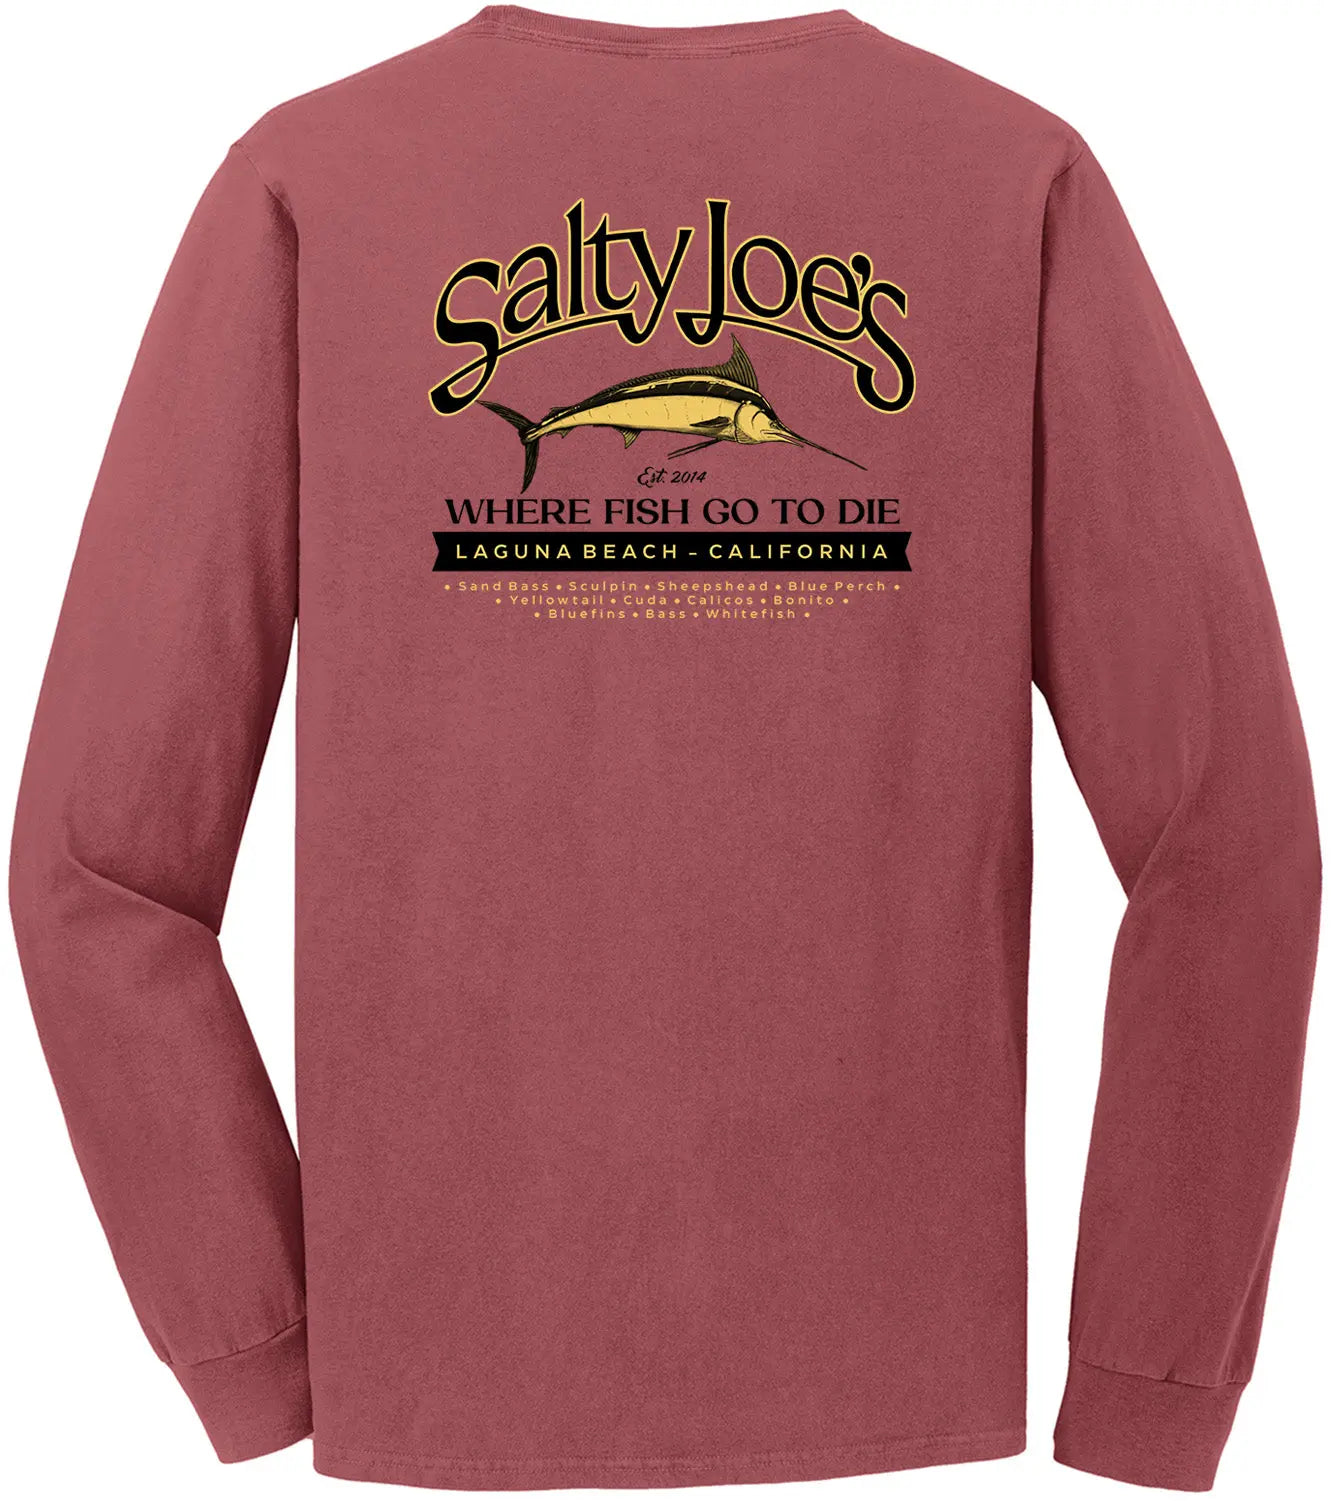 Salty Joe's Fish Count Beach Wash Garment Dyed Long Sleeve T-Shirt 4X-Large / Red